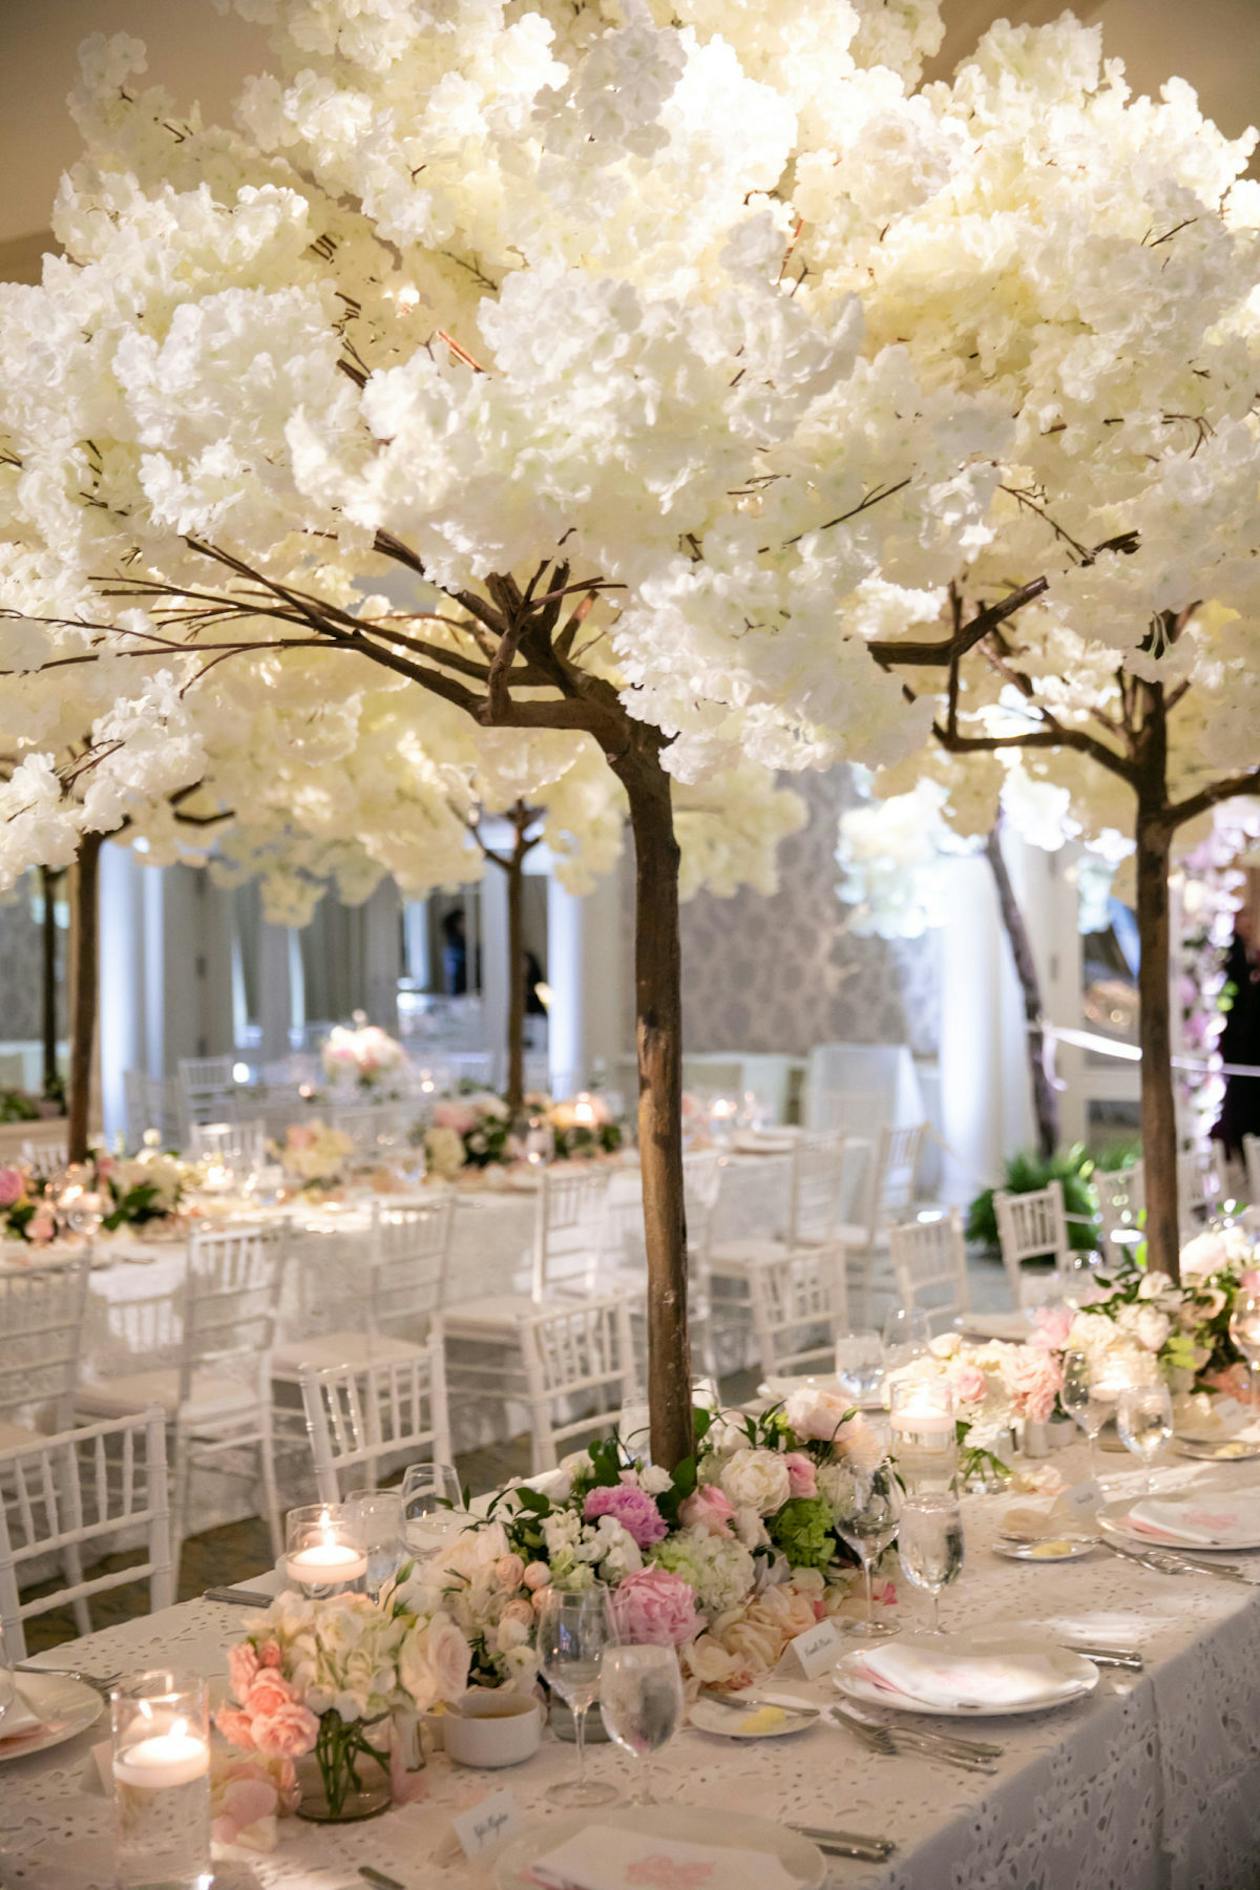 Spring Wedding With White Floral Trees on Table as Centerpiece | PartySlate